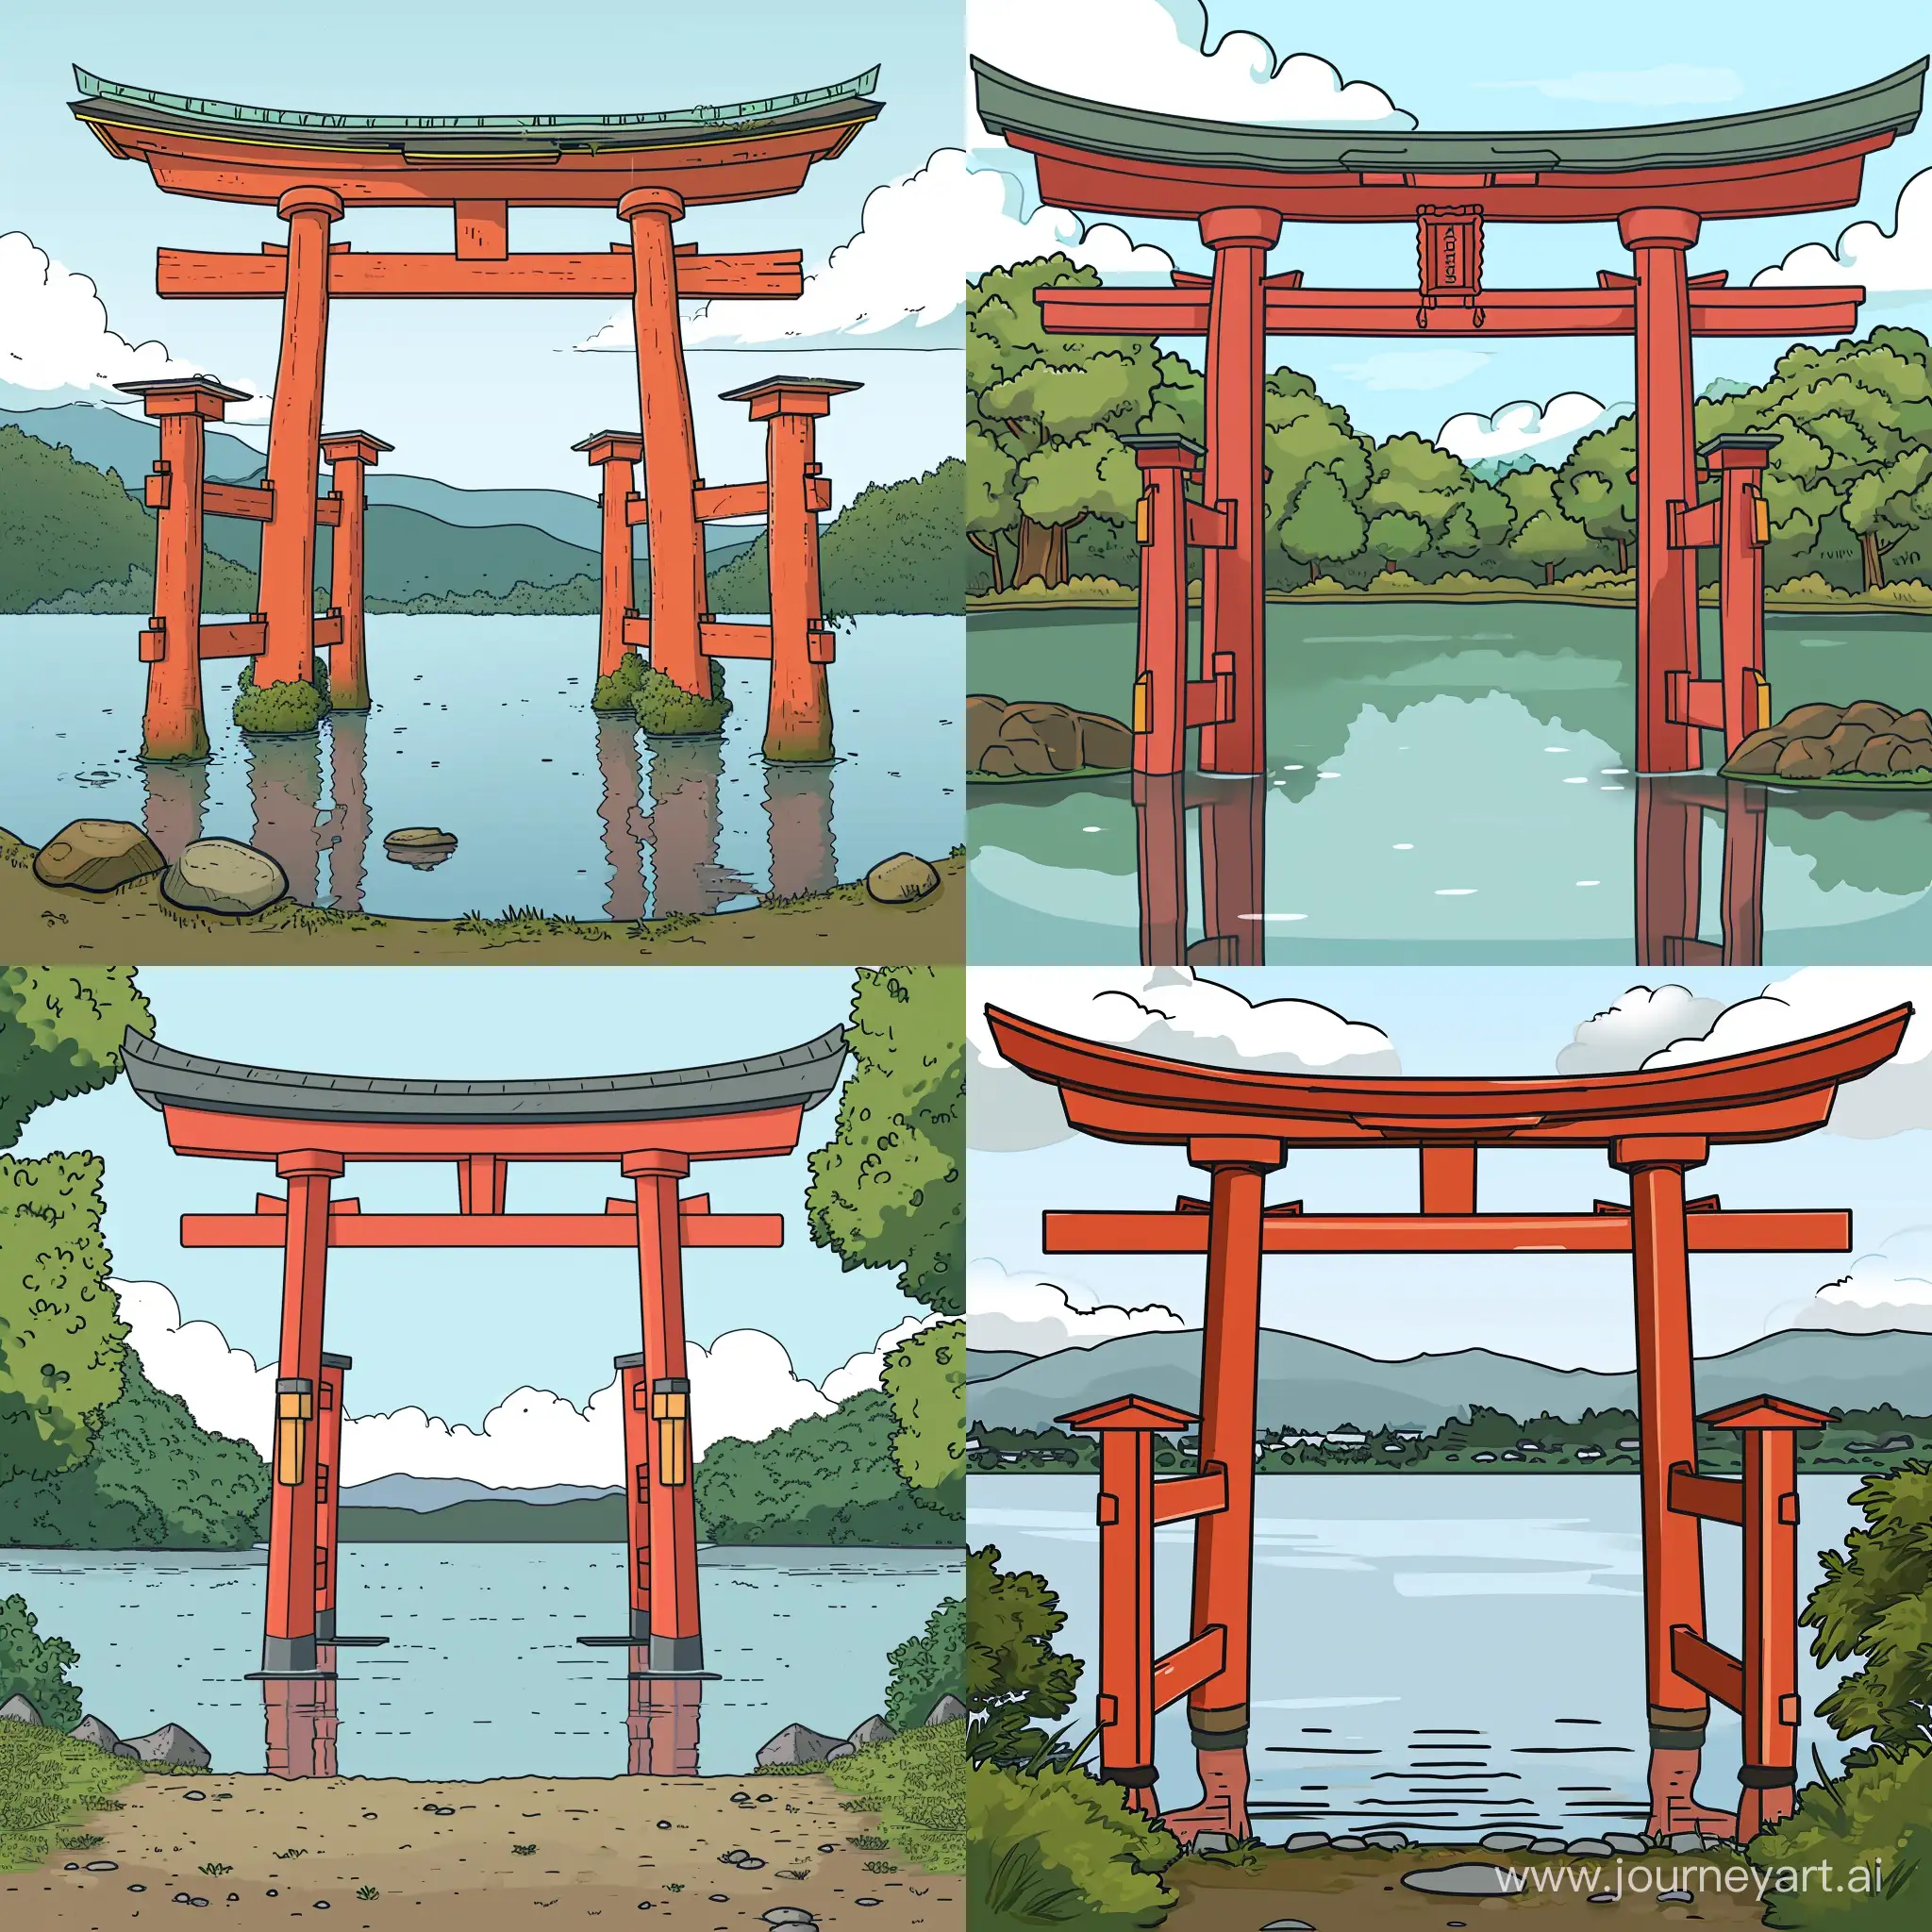 Tranquil-Japanese-Scene-with-Red-Torii-Gate-Reflecting-in-the-Lake-Cartoon-Style